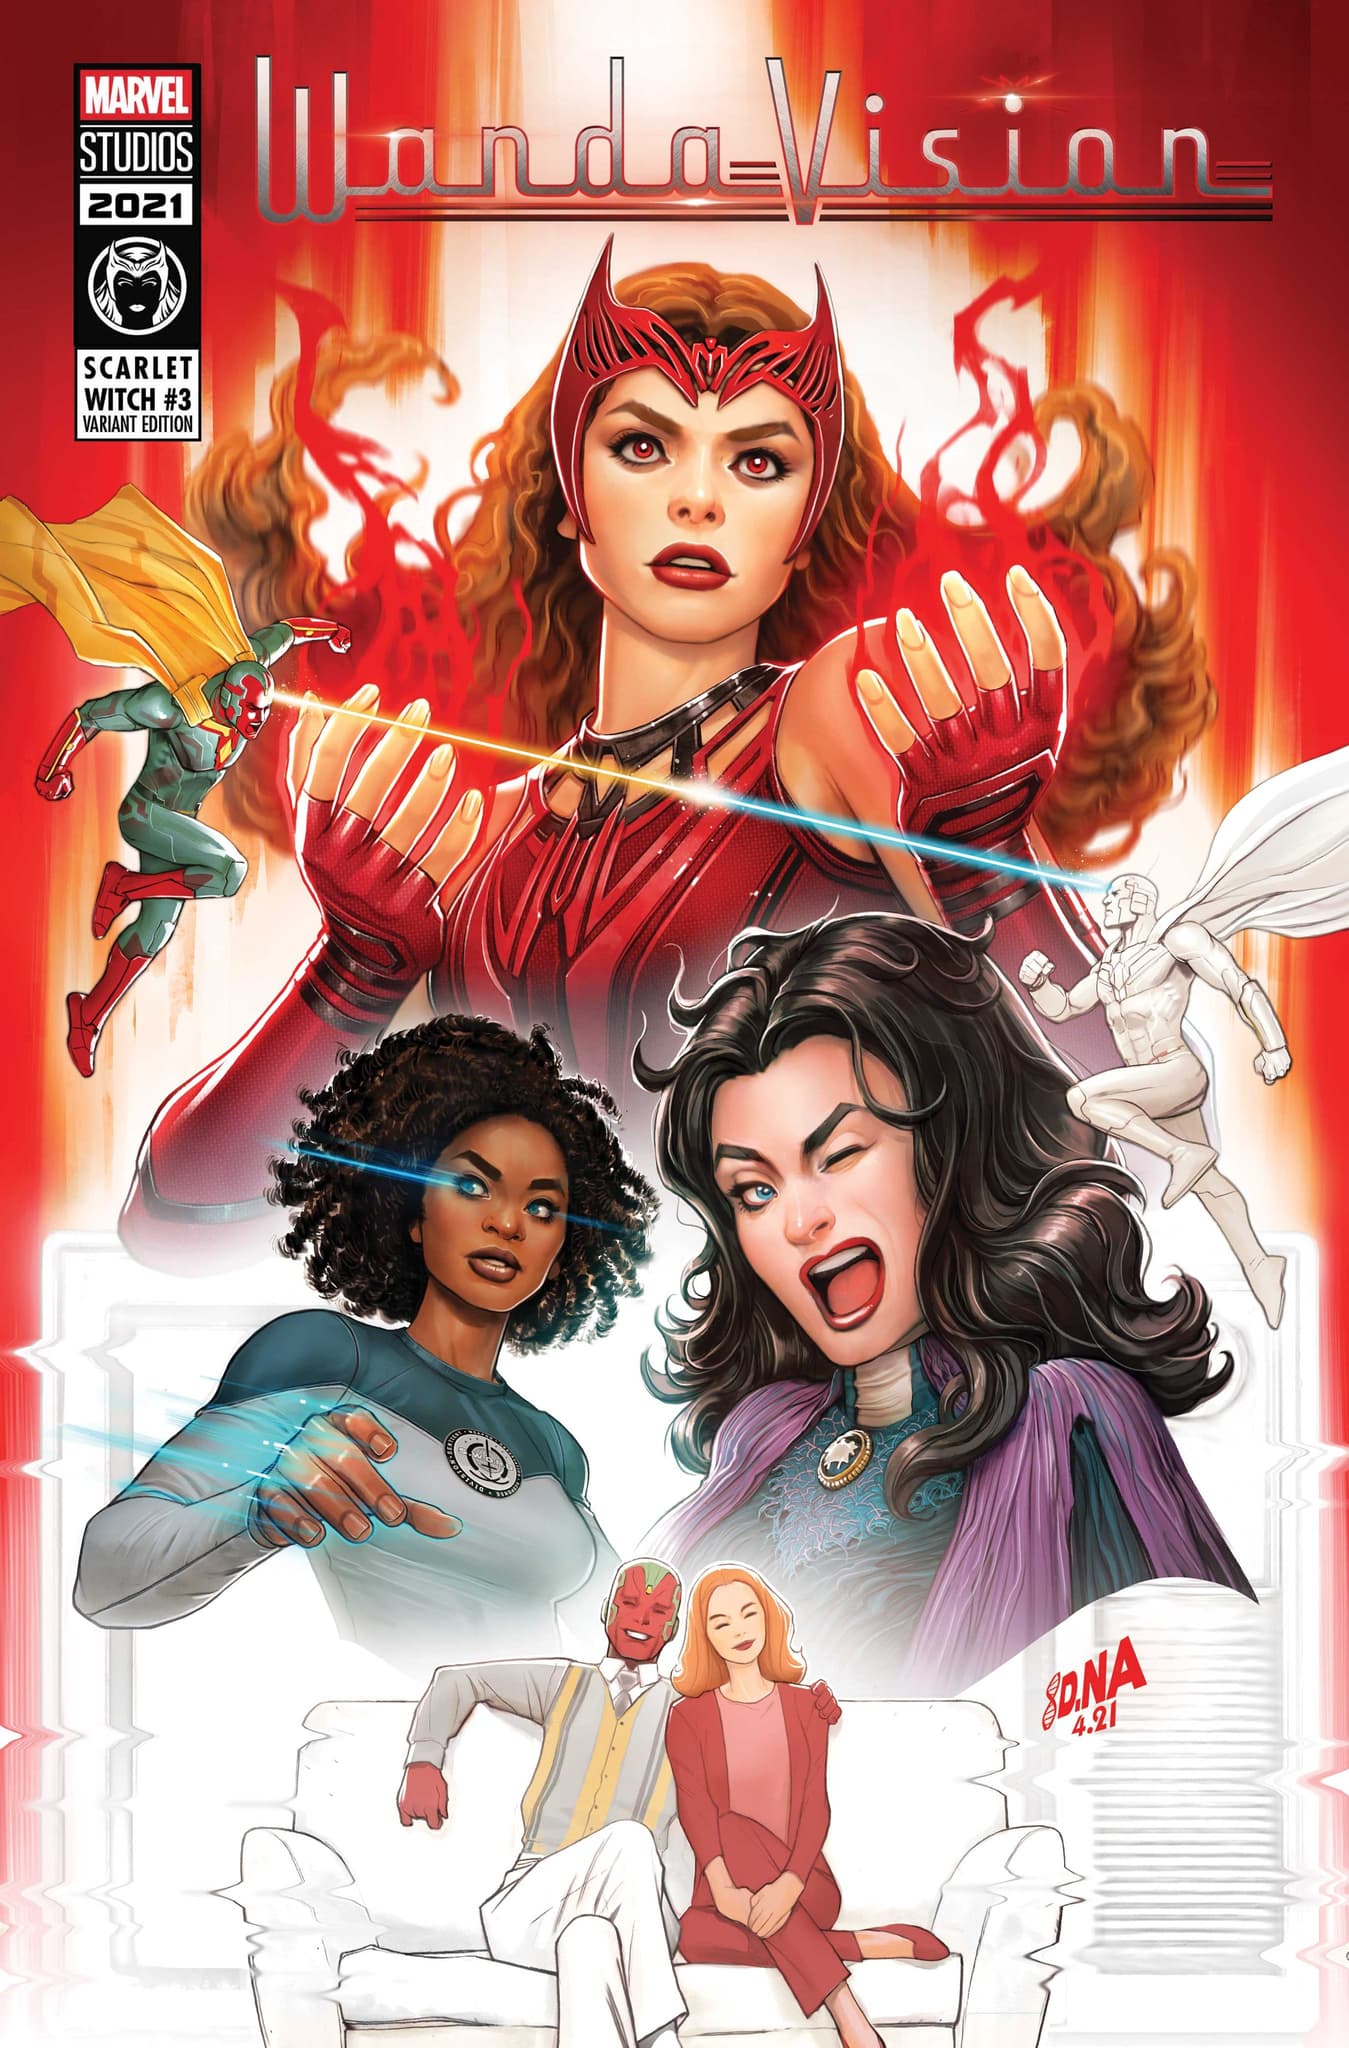 SCARLET WITCH #3 MCU Variant Cover by David Nakayama